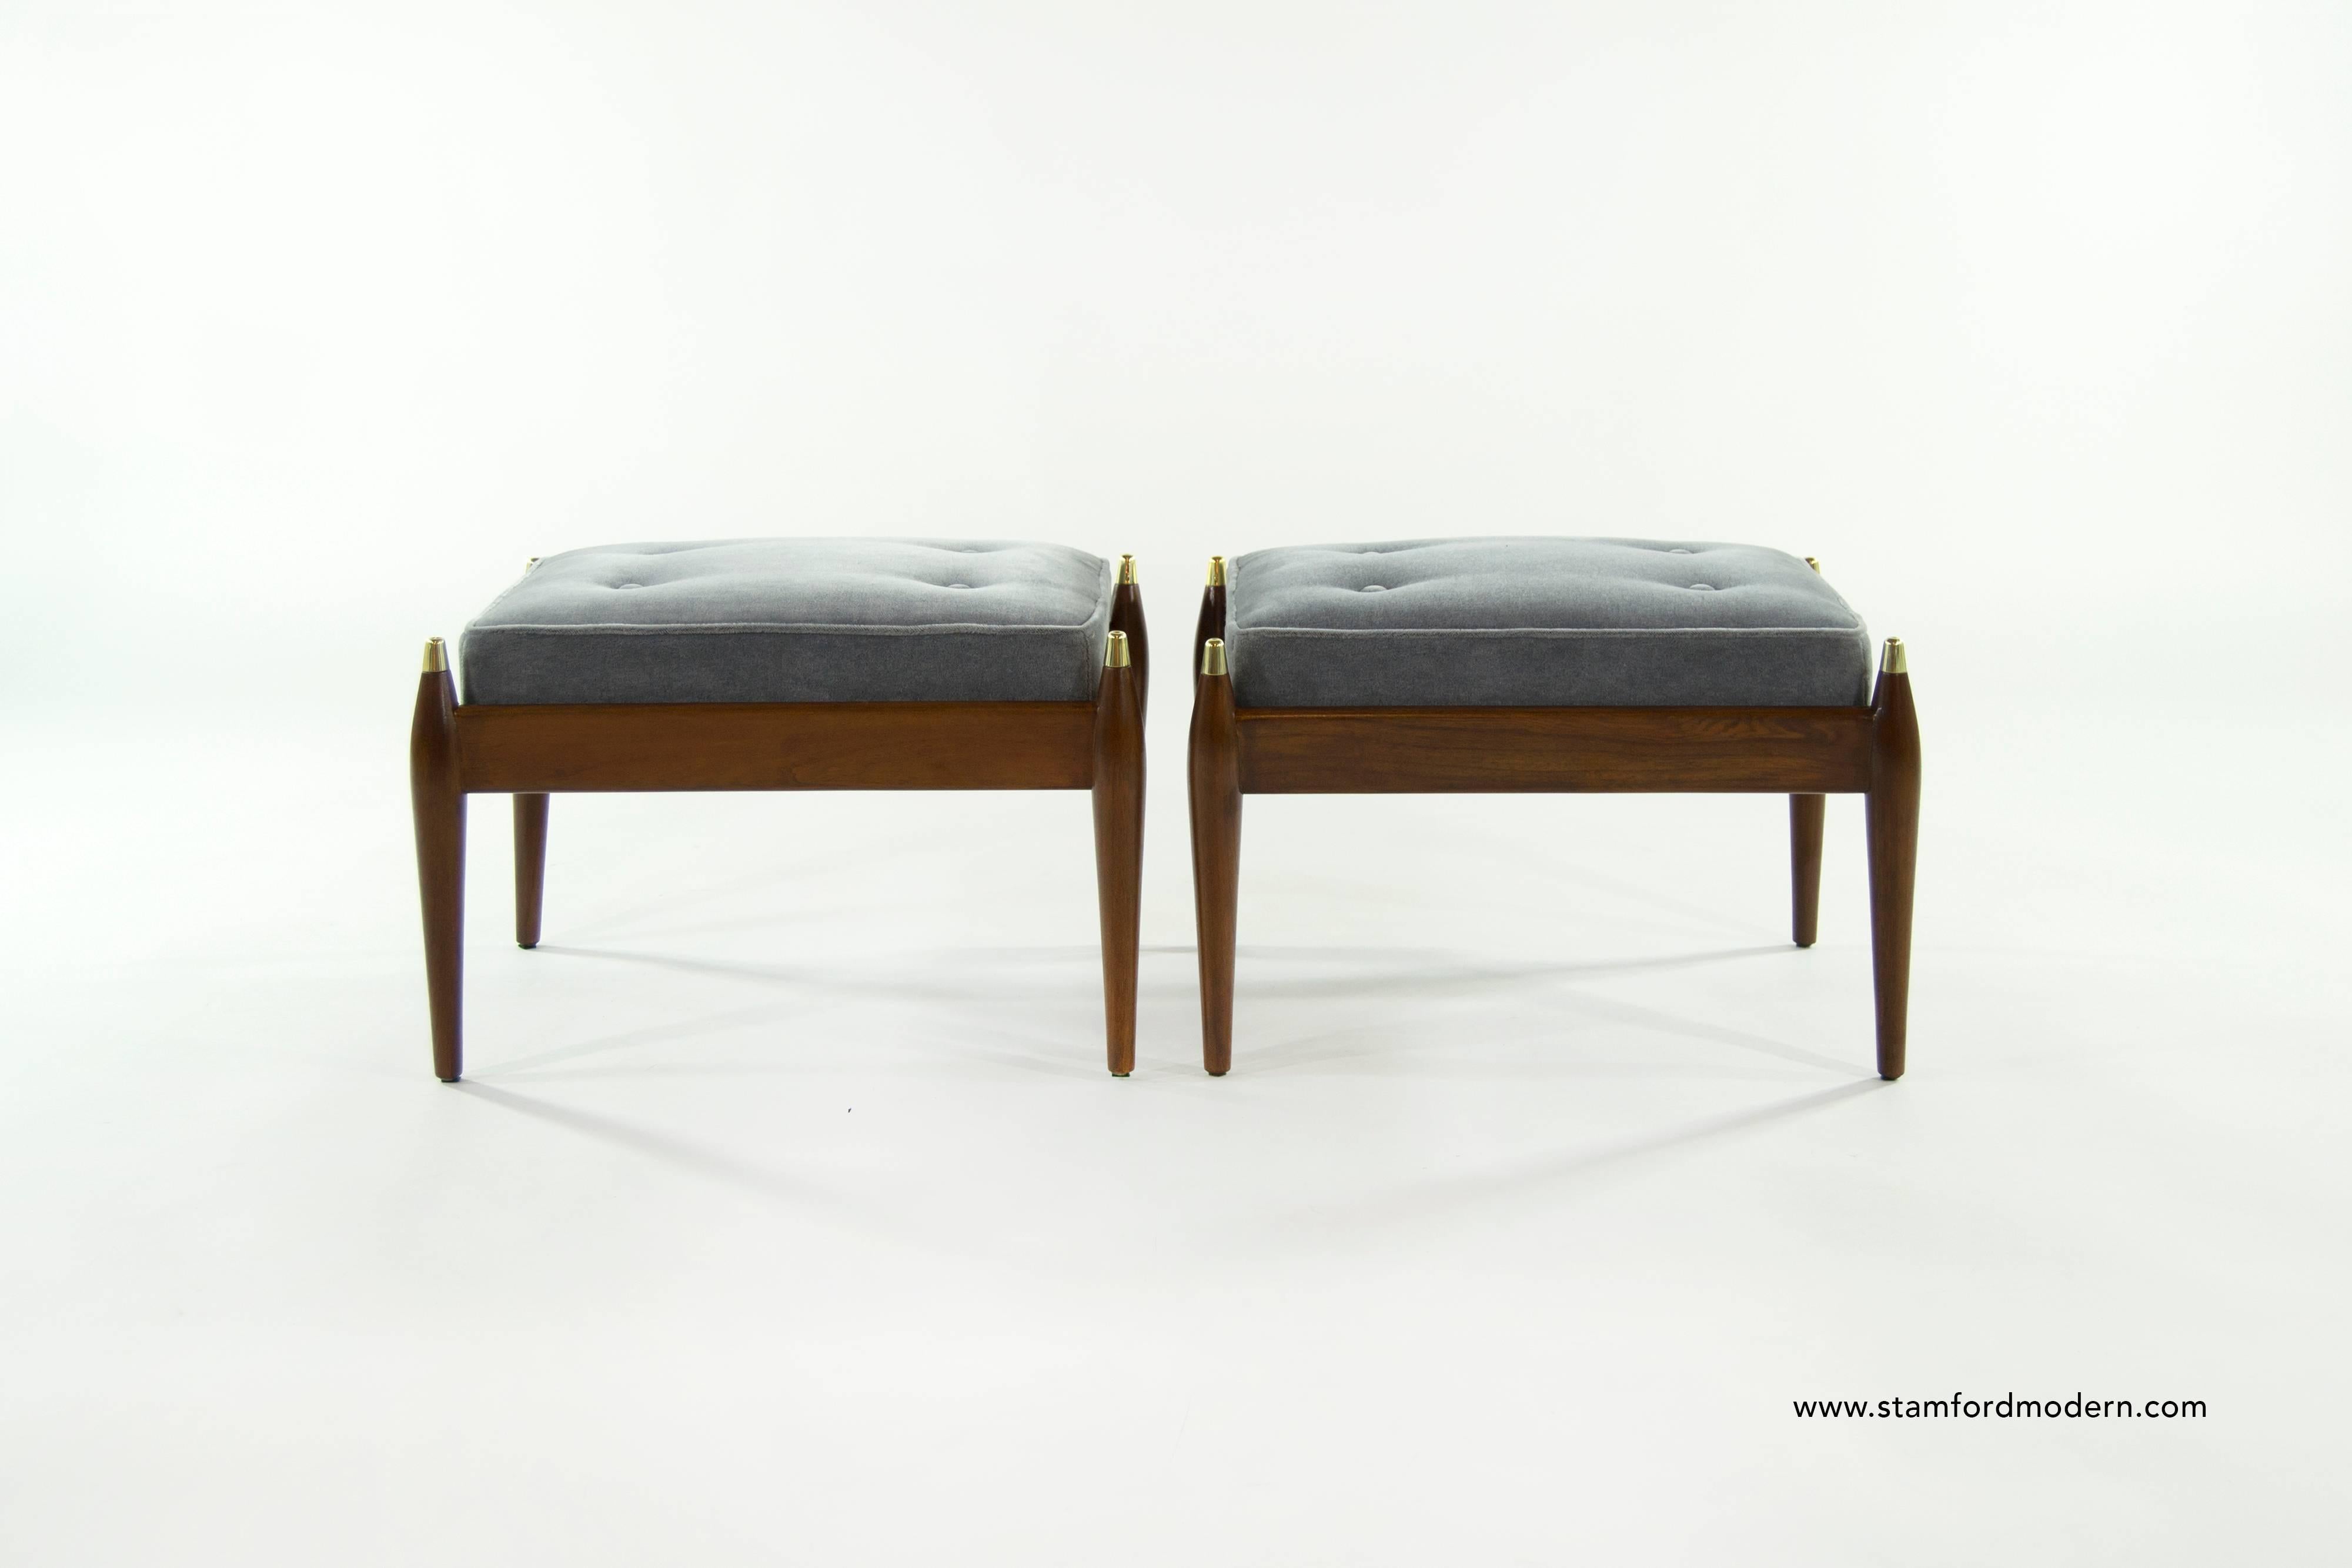 Pair of teak stools with brass details, newly upholstered in mohair.